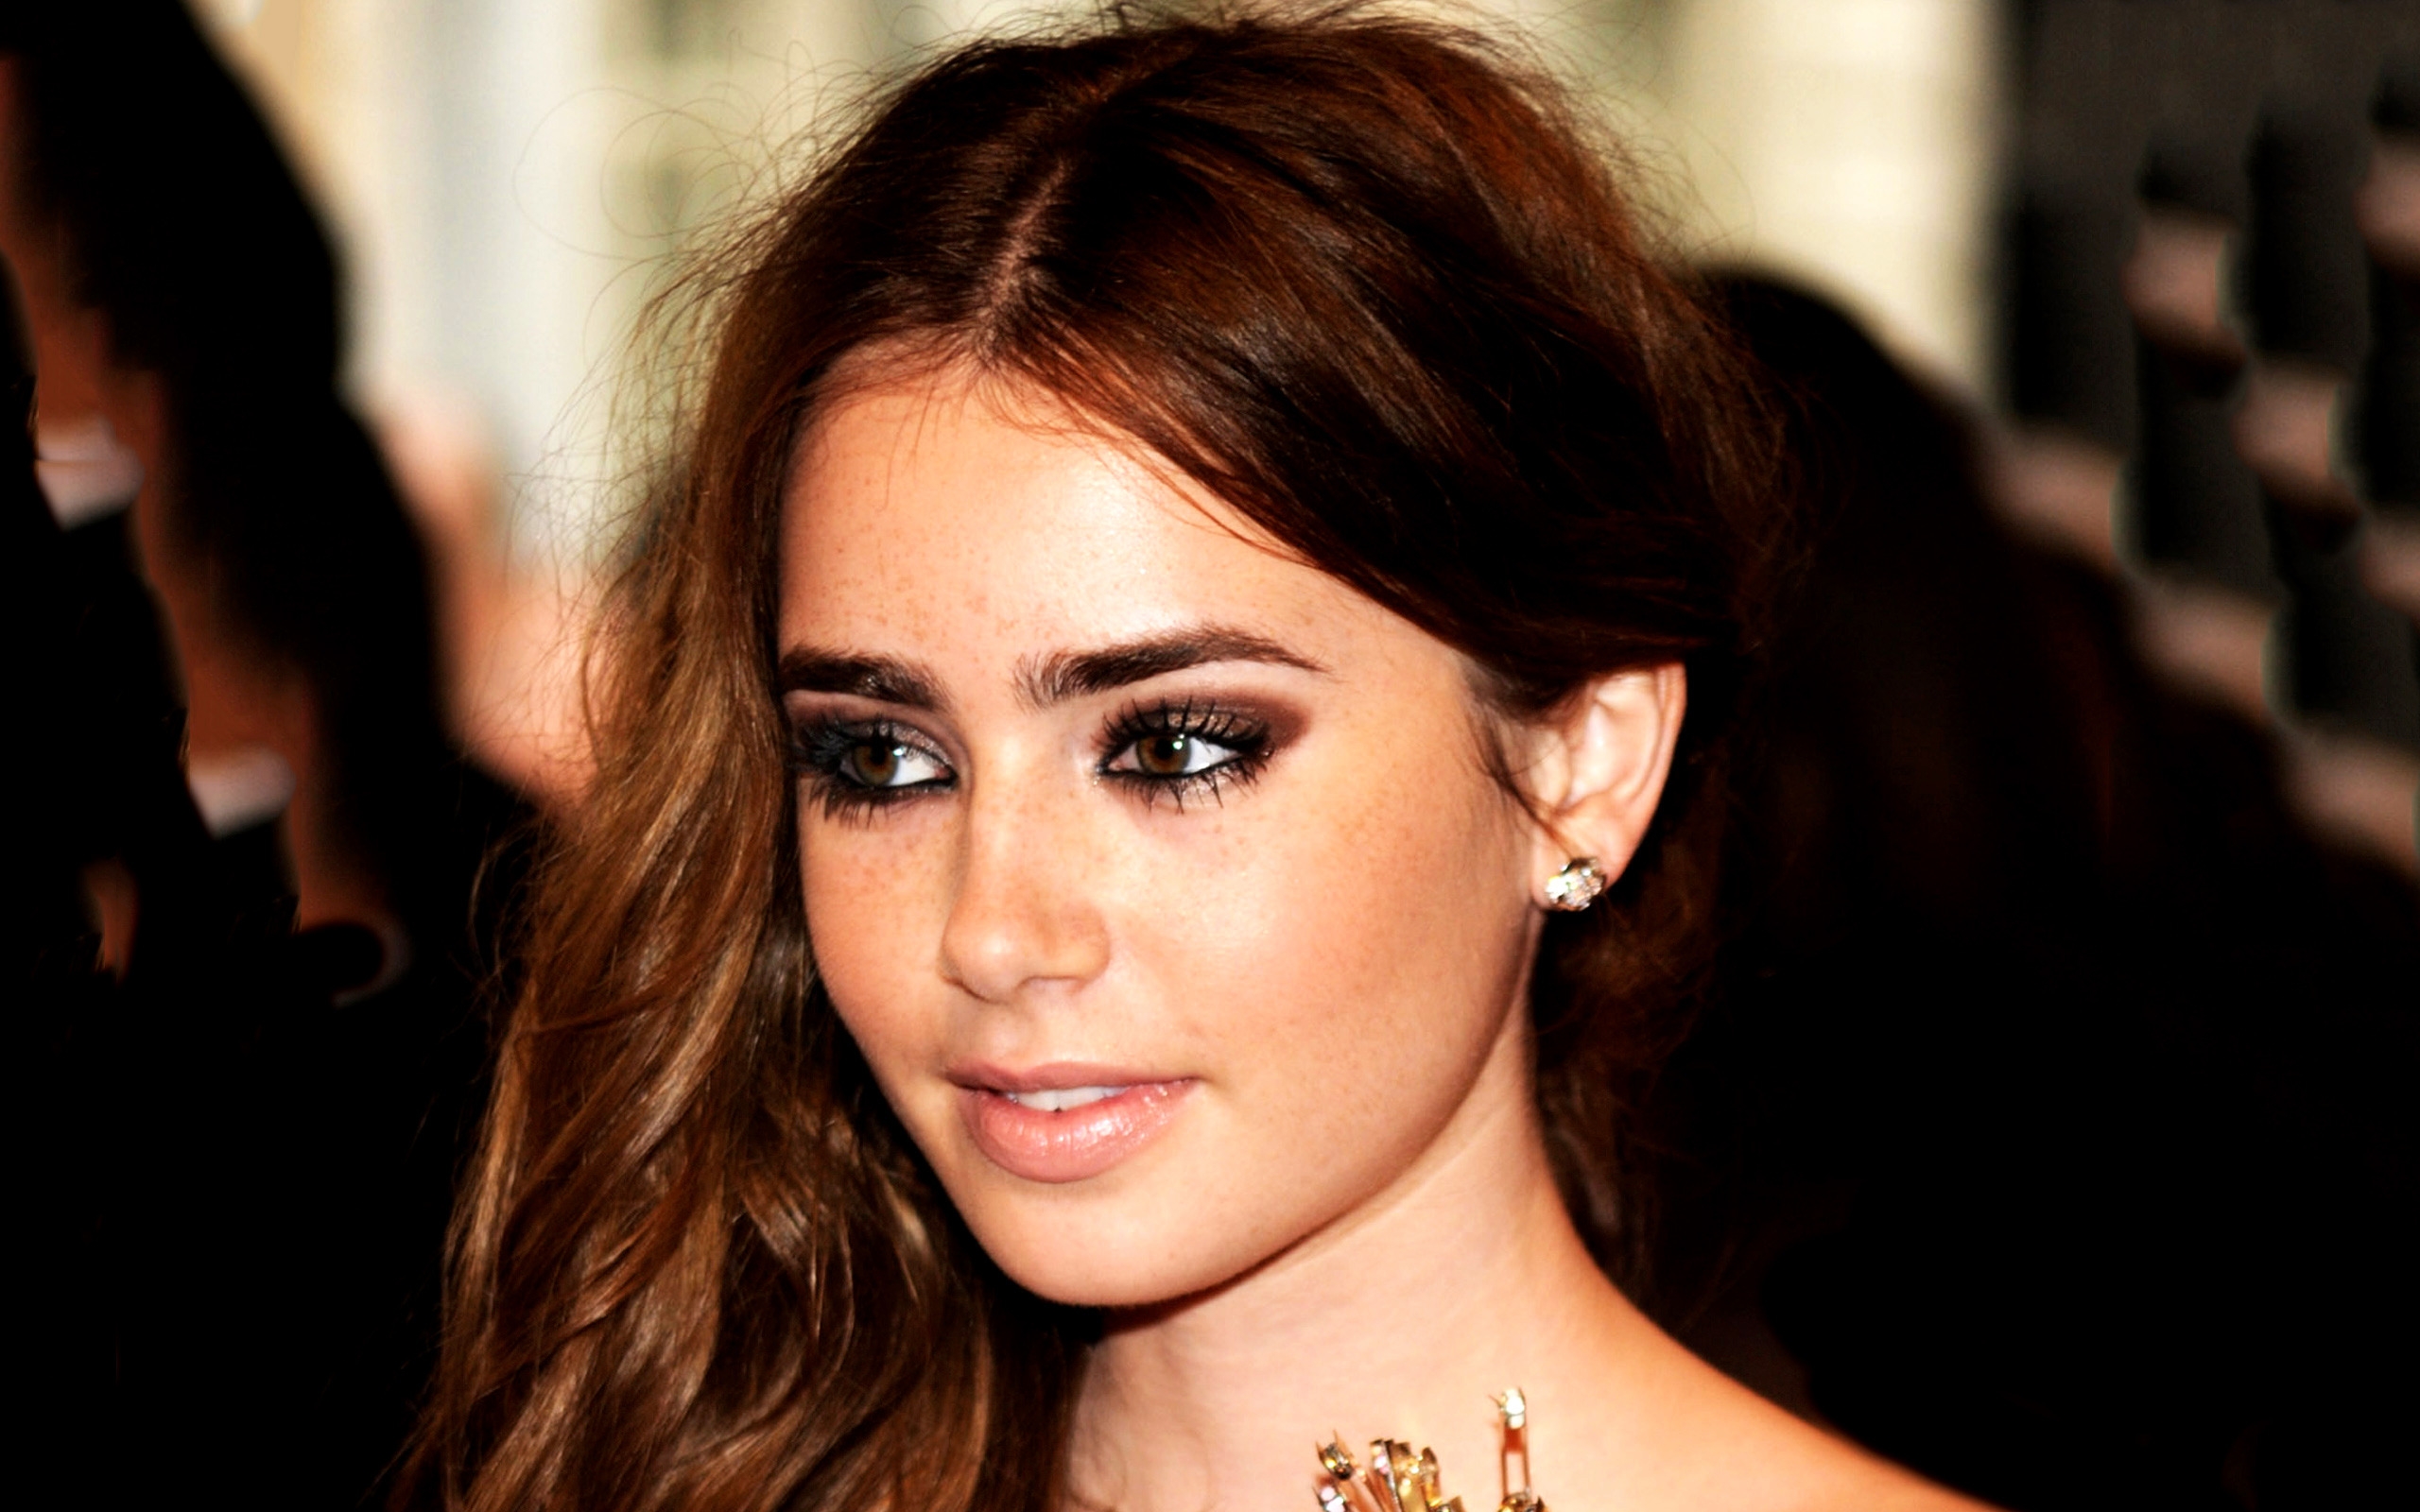 Lily Jane Collins for 2560 x 1600 widescreen resolution